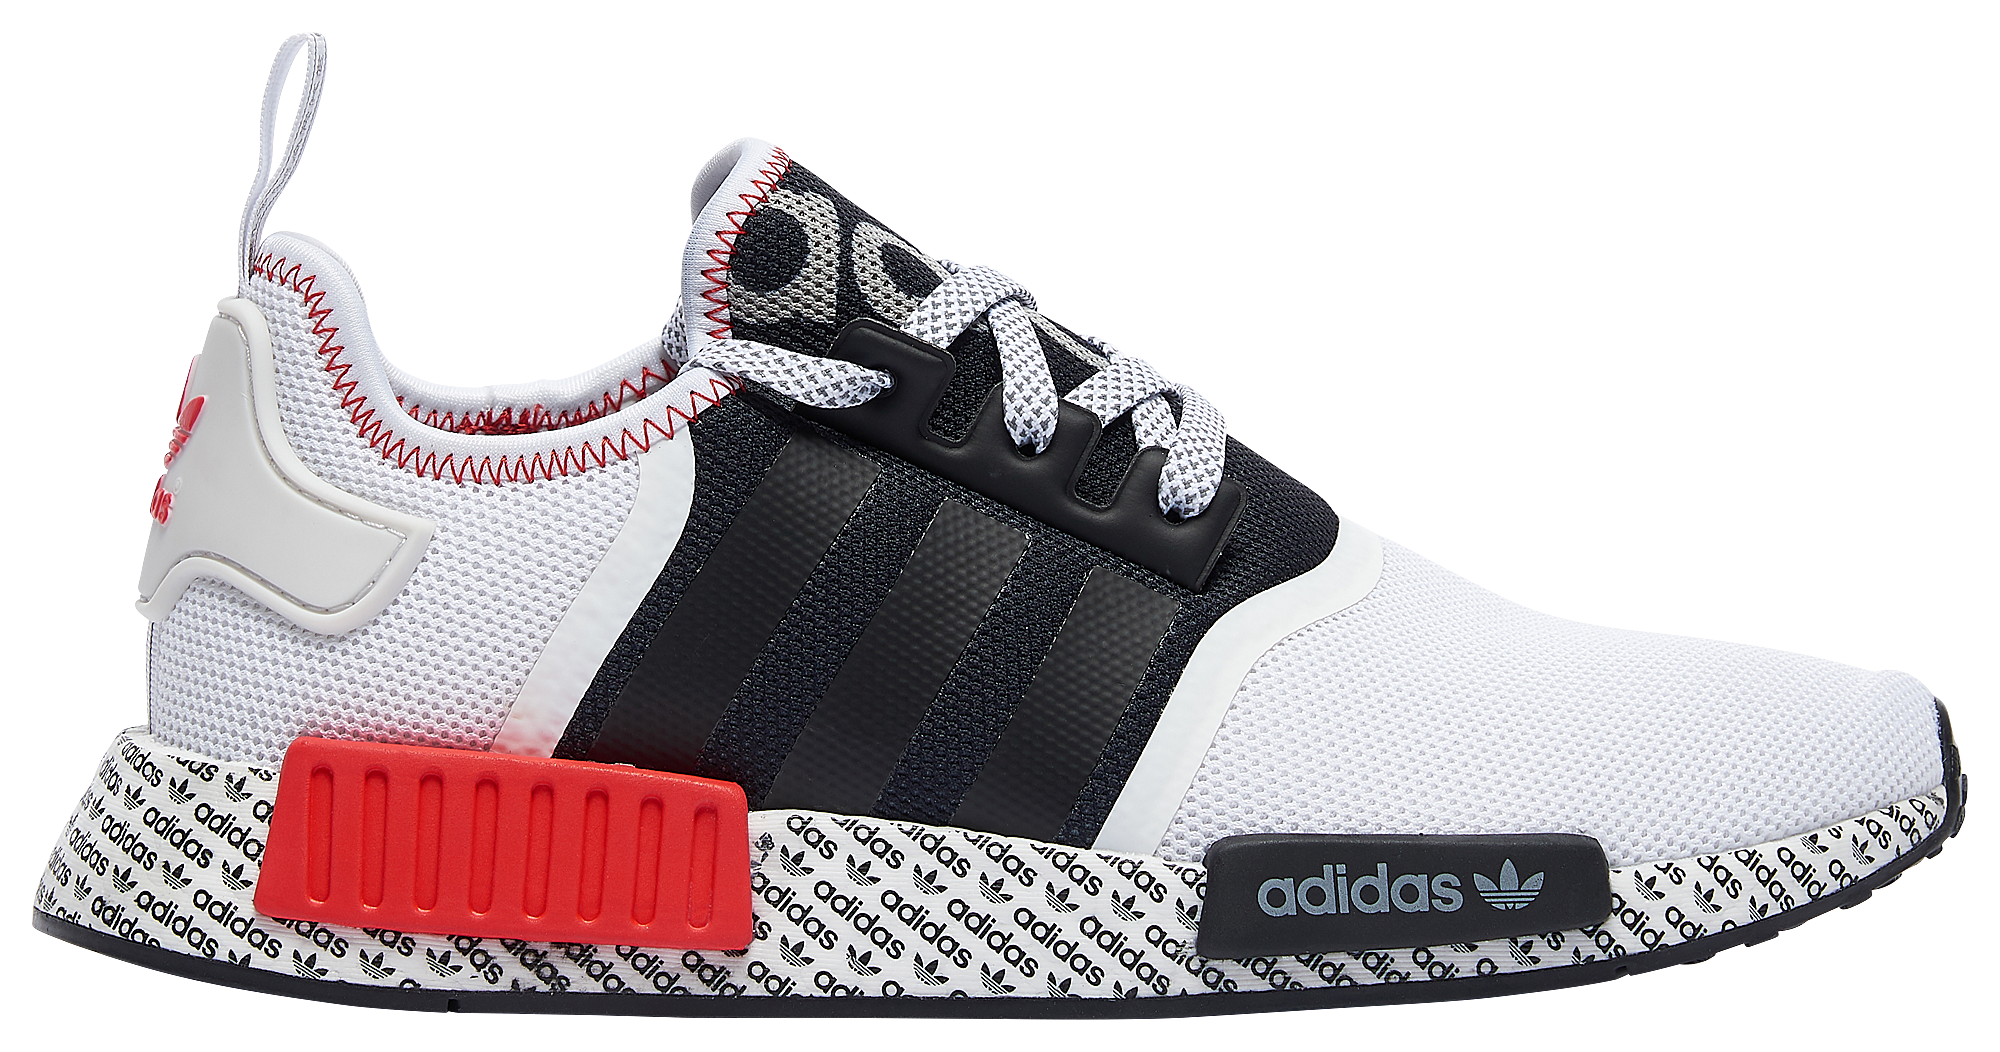 adidas Core NMD R1 Black White Clear Pink His trainers